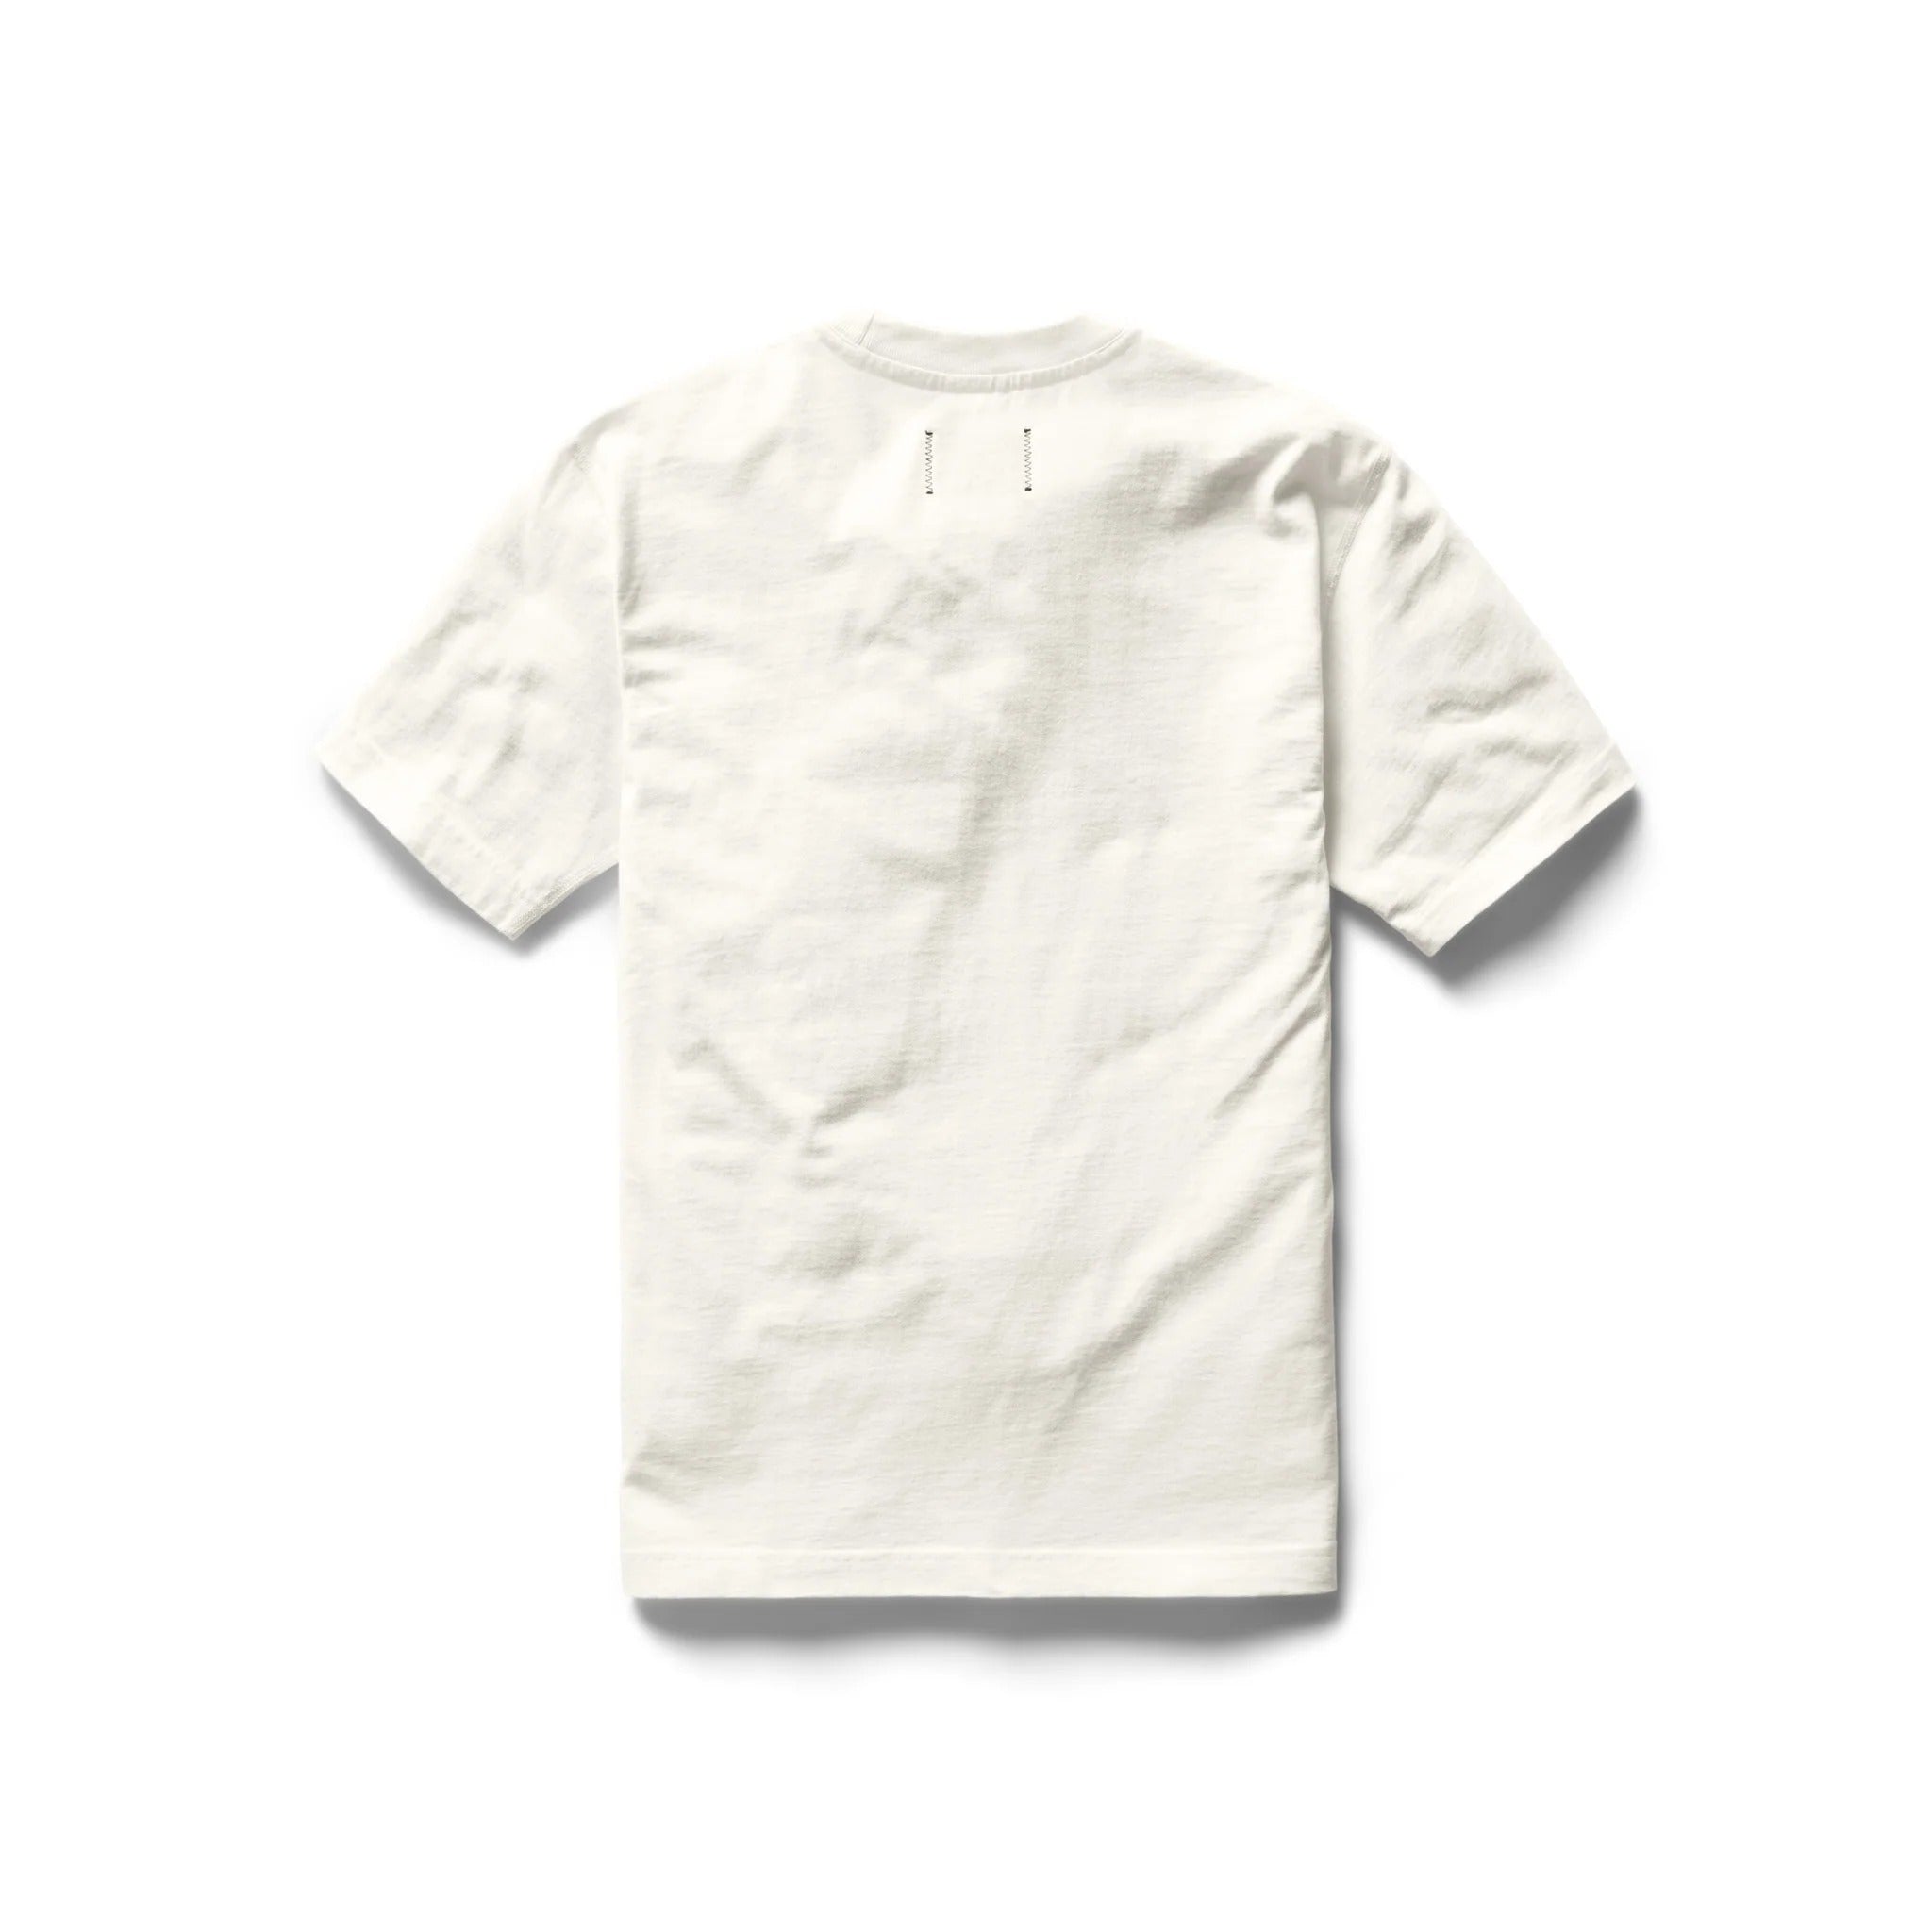 Reigning Champ Men Embroidered Script T-Shirt Ivory RC-1377-IVO - T-SHIRTS - Canada